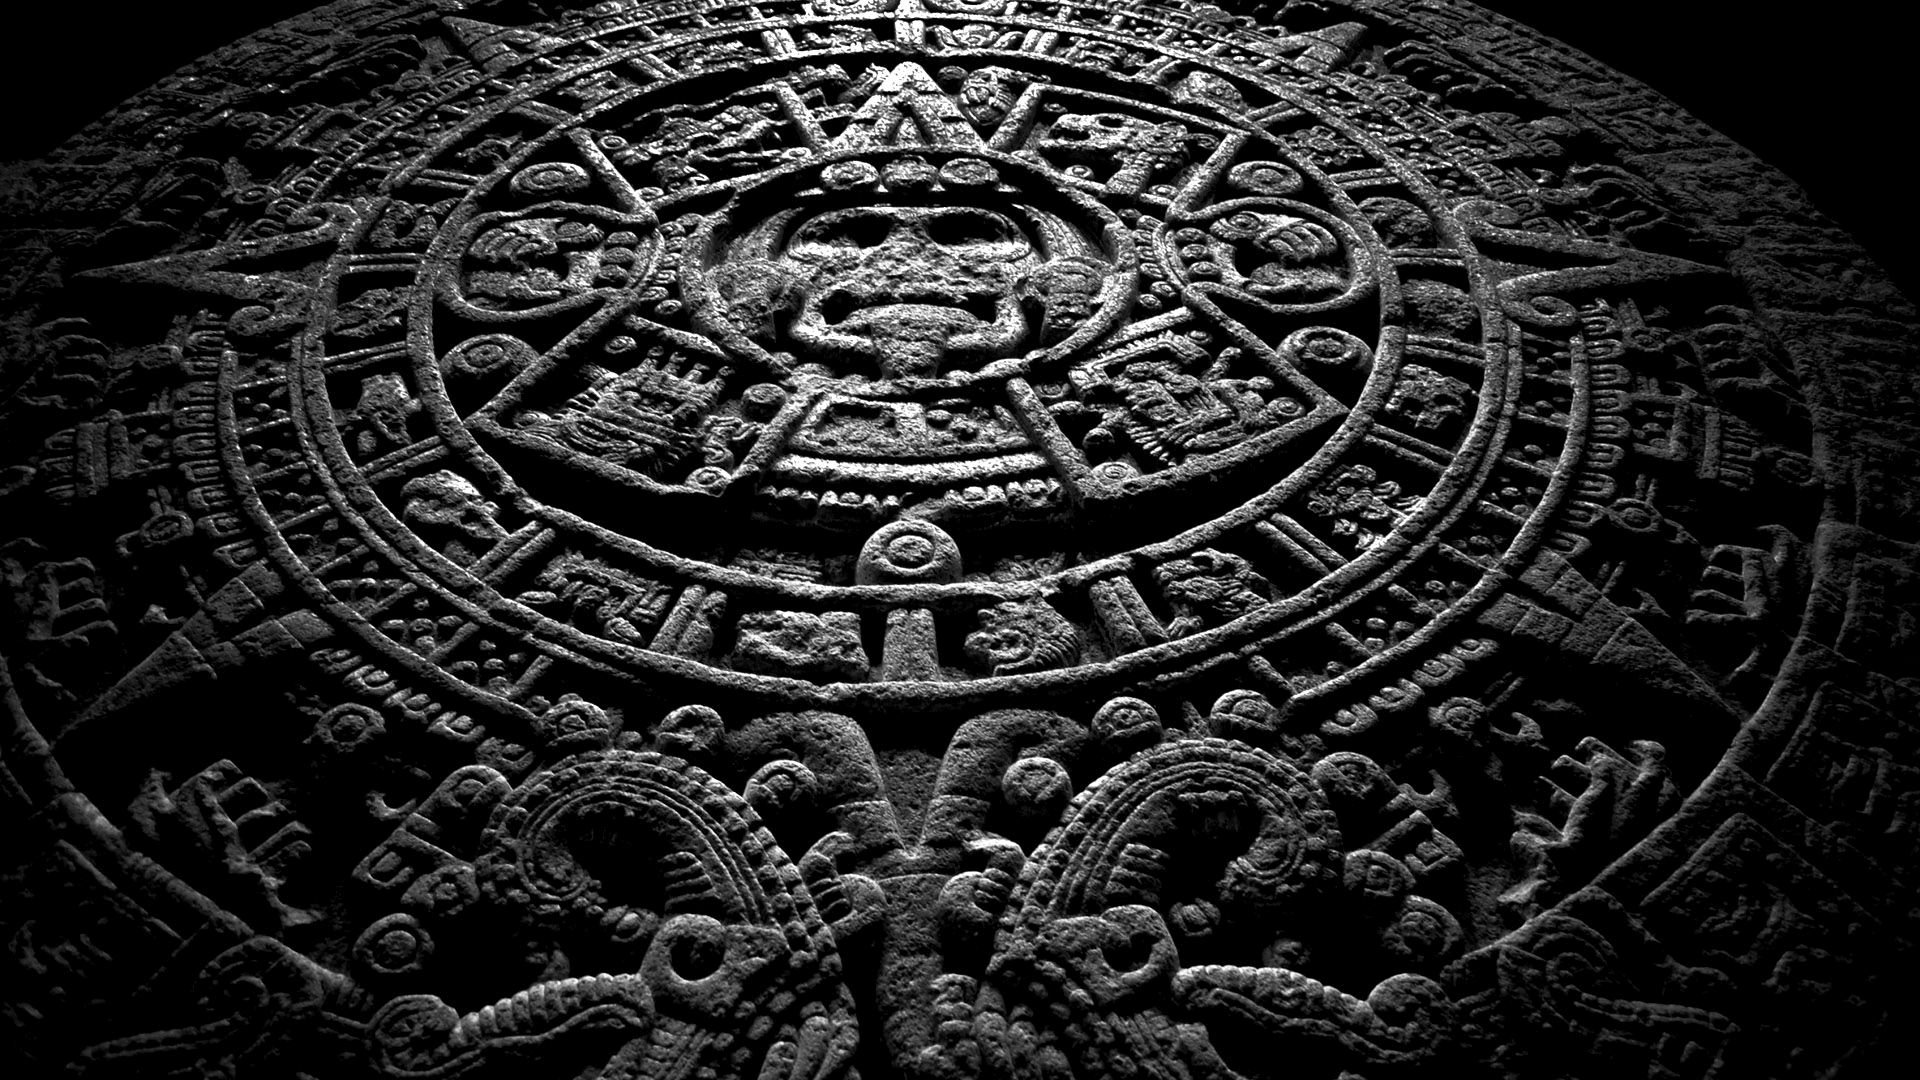 The earliest evidence of the Mayan divination calendar inside the